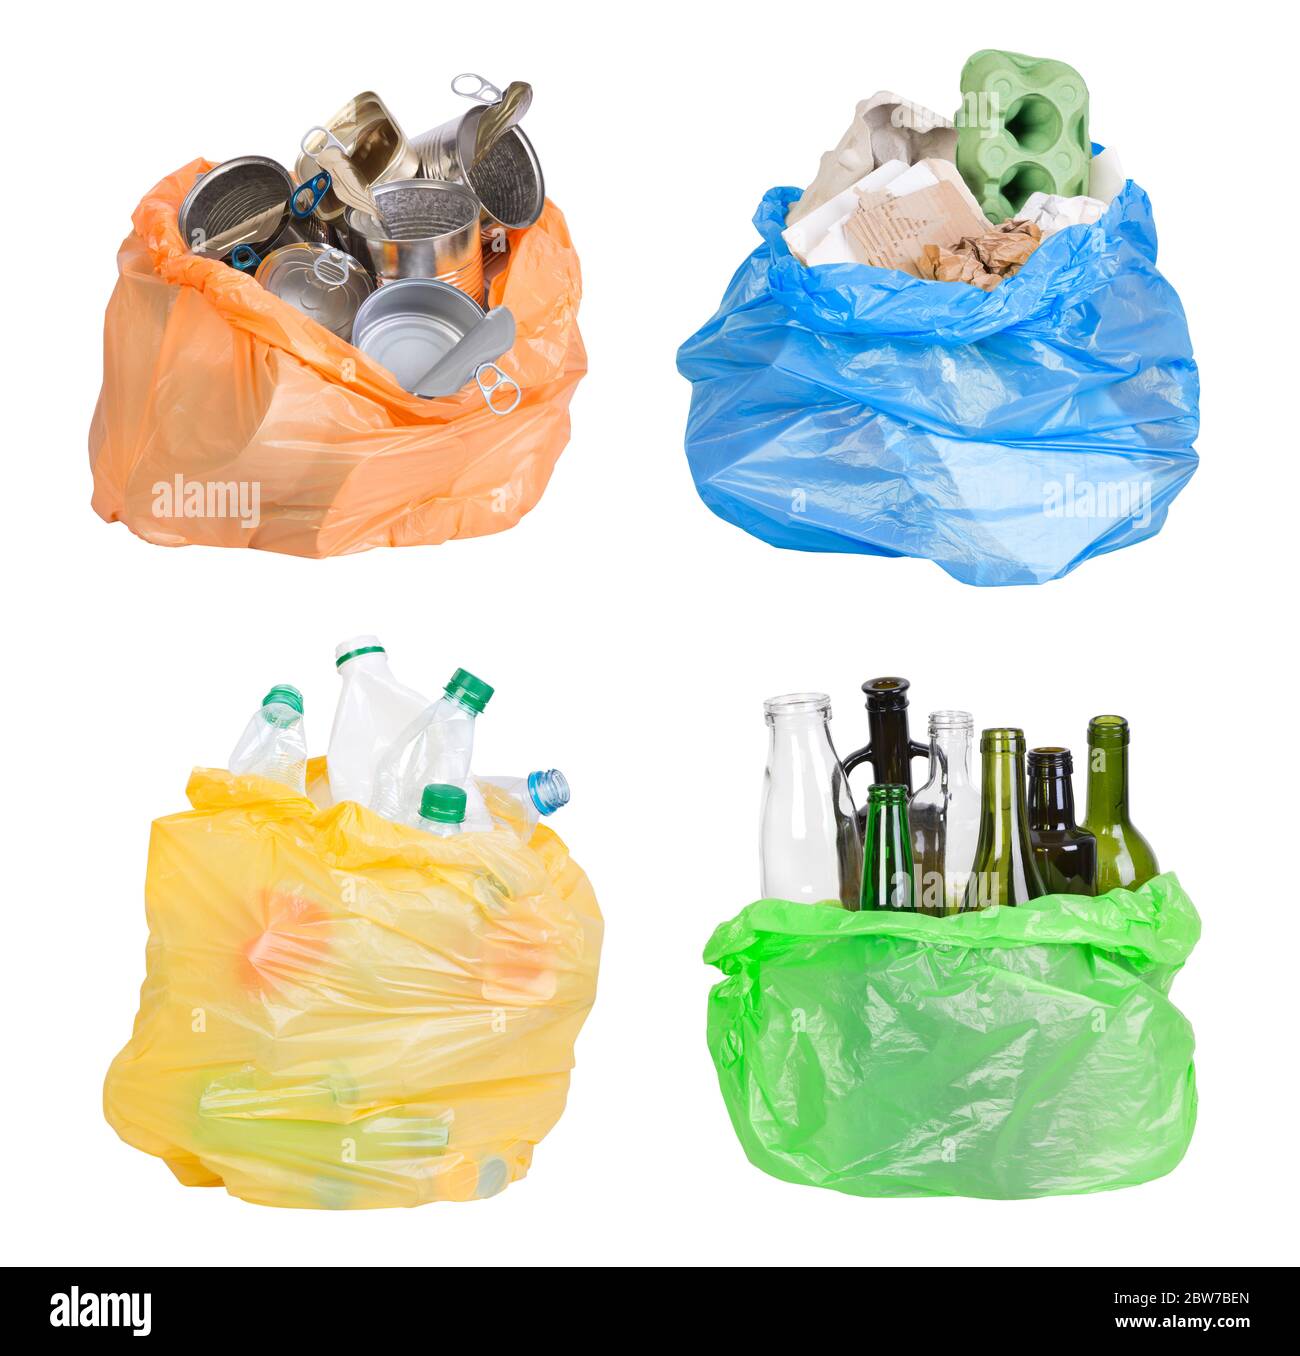 Samples of garbage in plastic bags isolated on white background Stock Photo